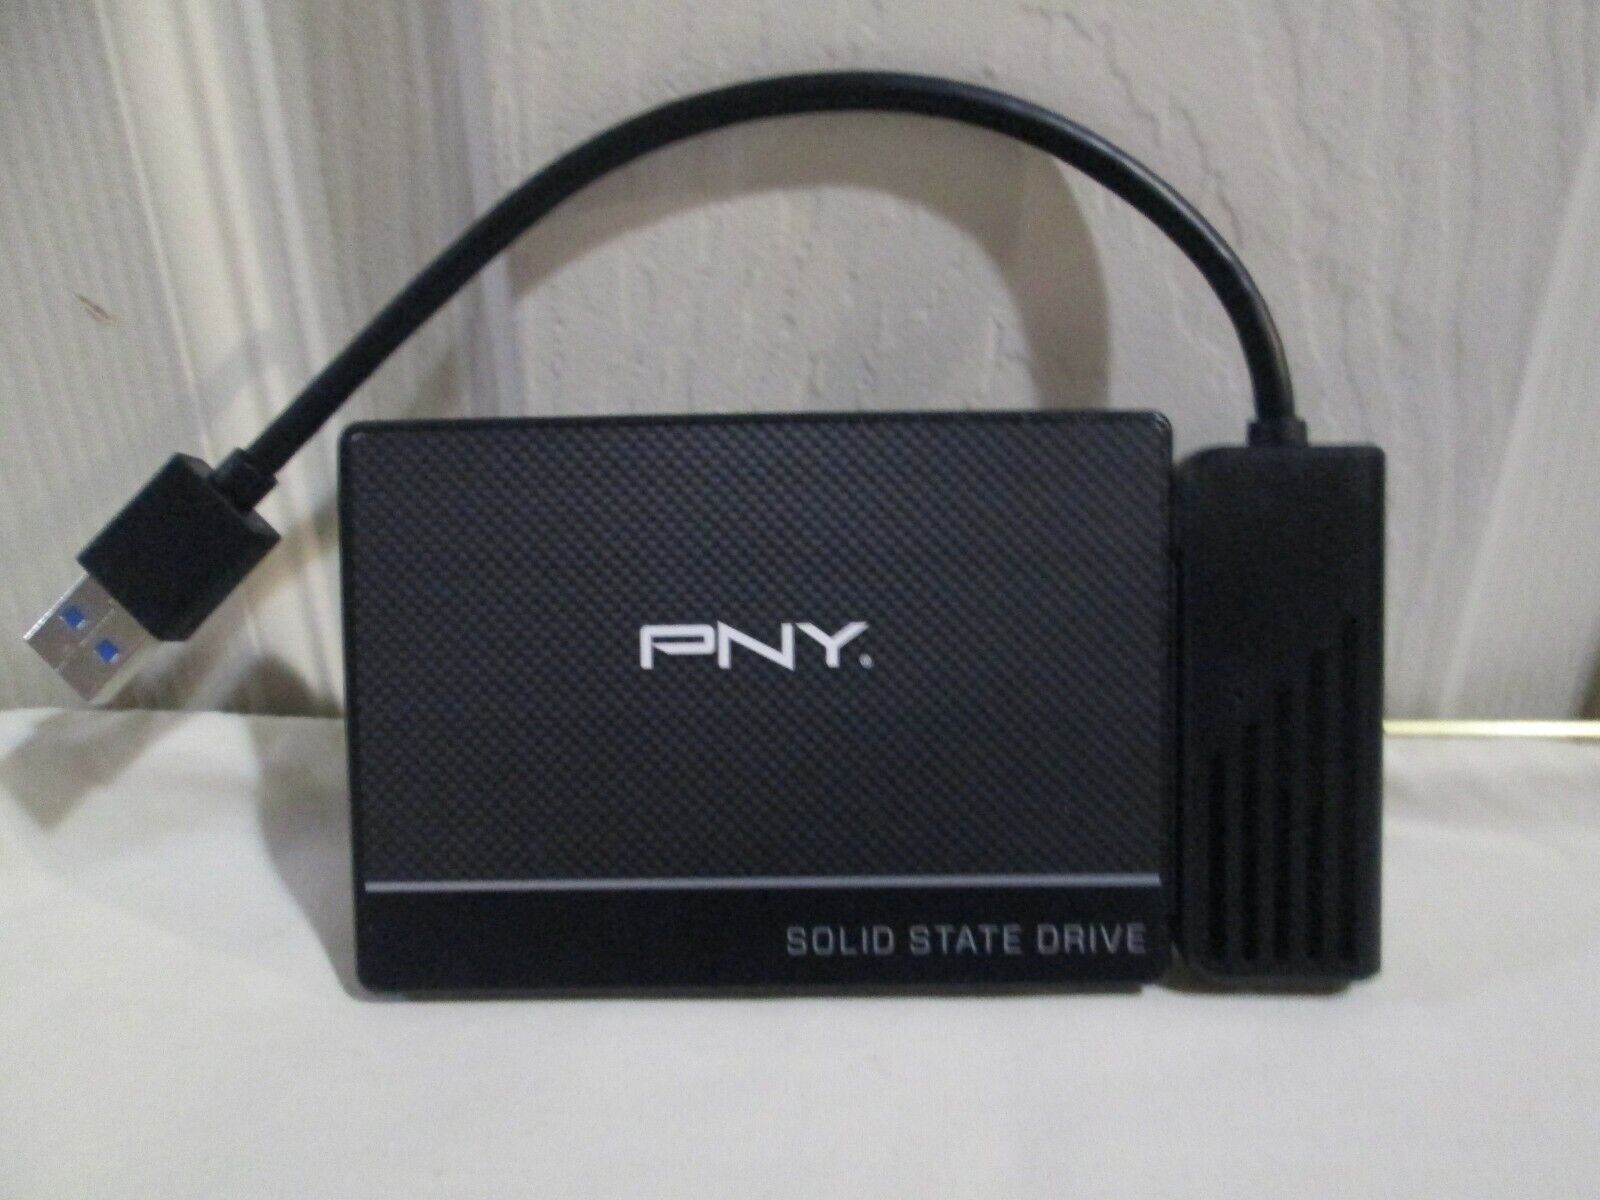 PNY 500GB INTERNAL SSD DRIVE AND TRANSFER CABLE  OPEN BOX-NEVER USED.